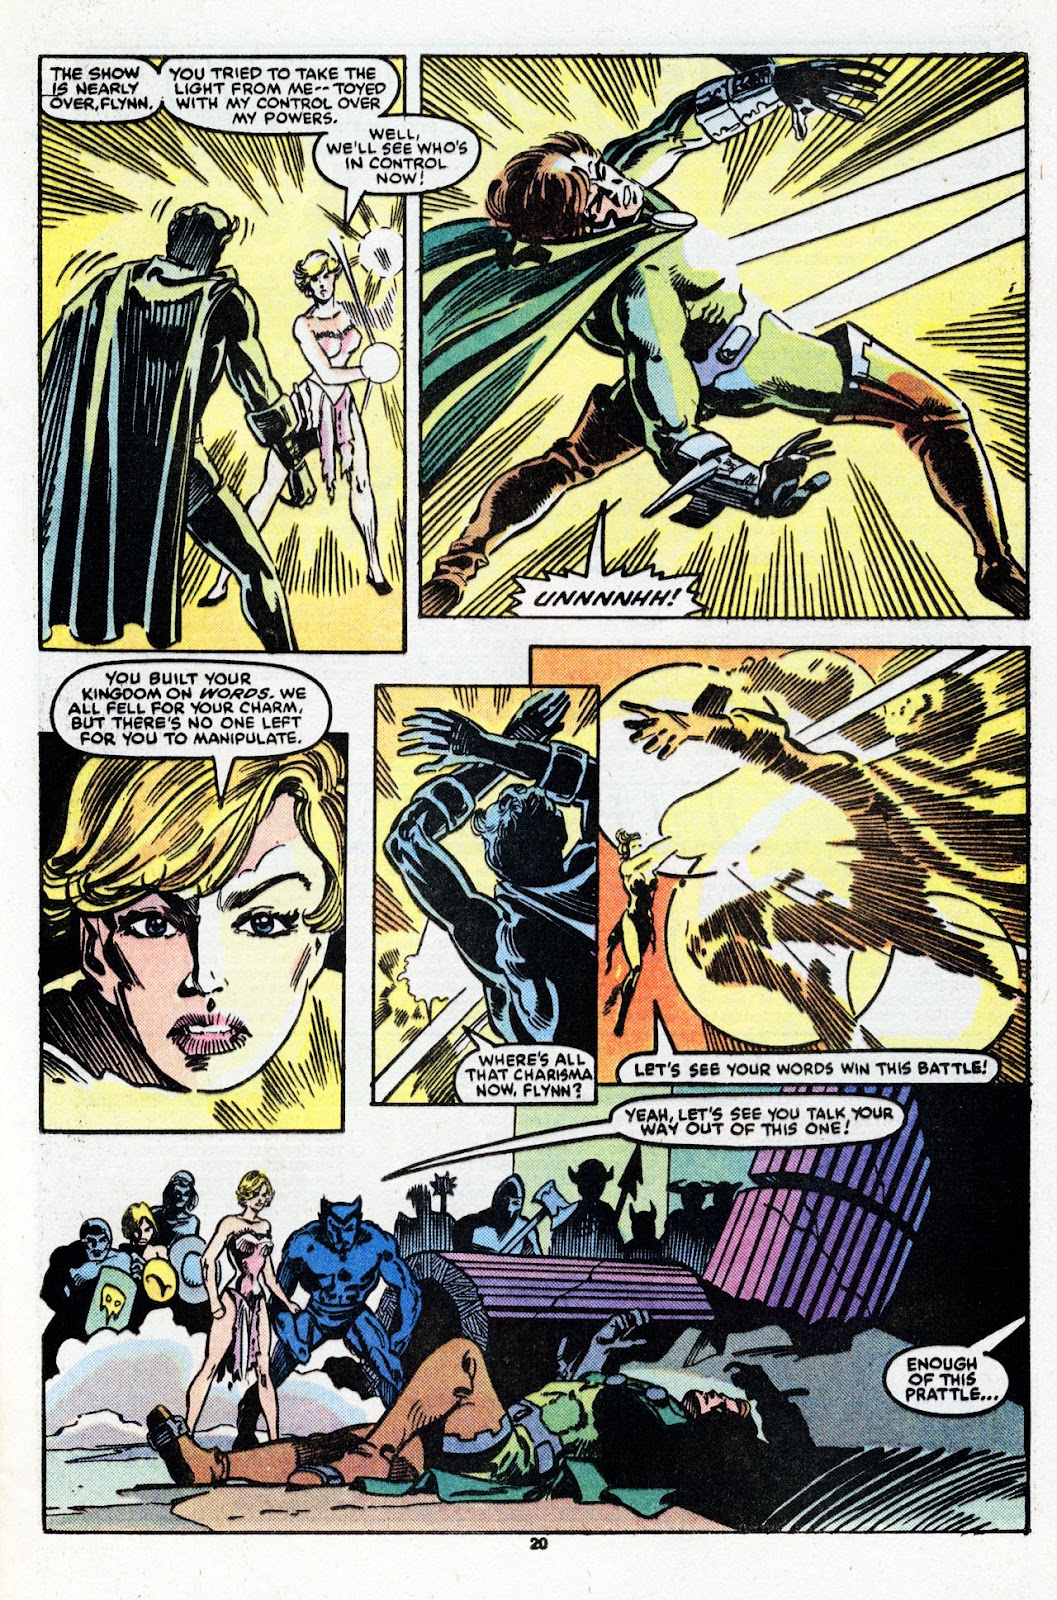 Beauty and the Beast (1984) issue 4 - Page 29